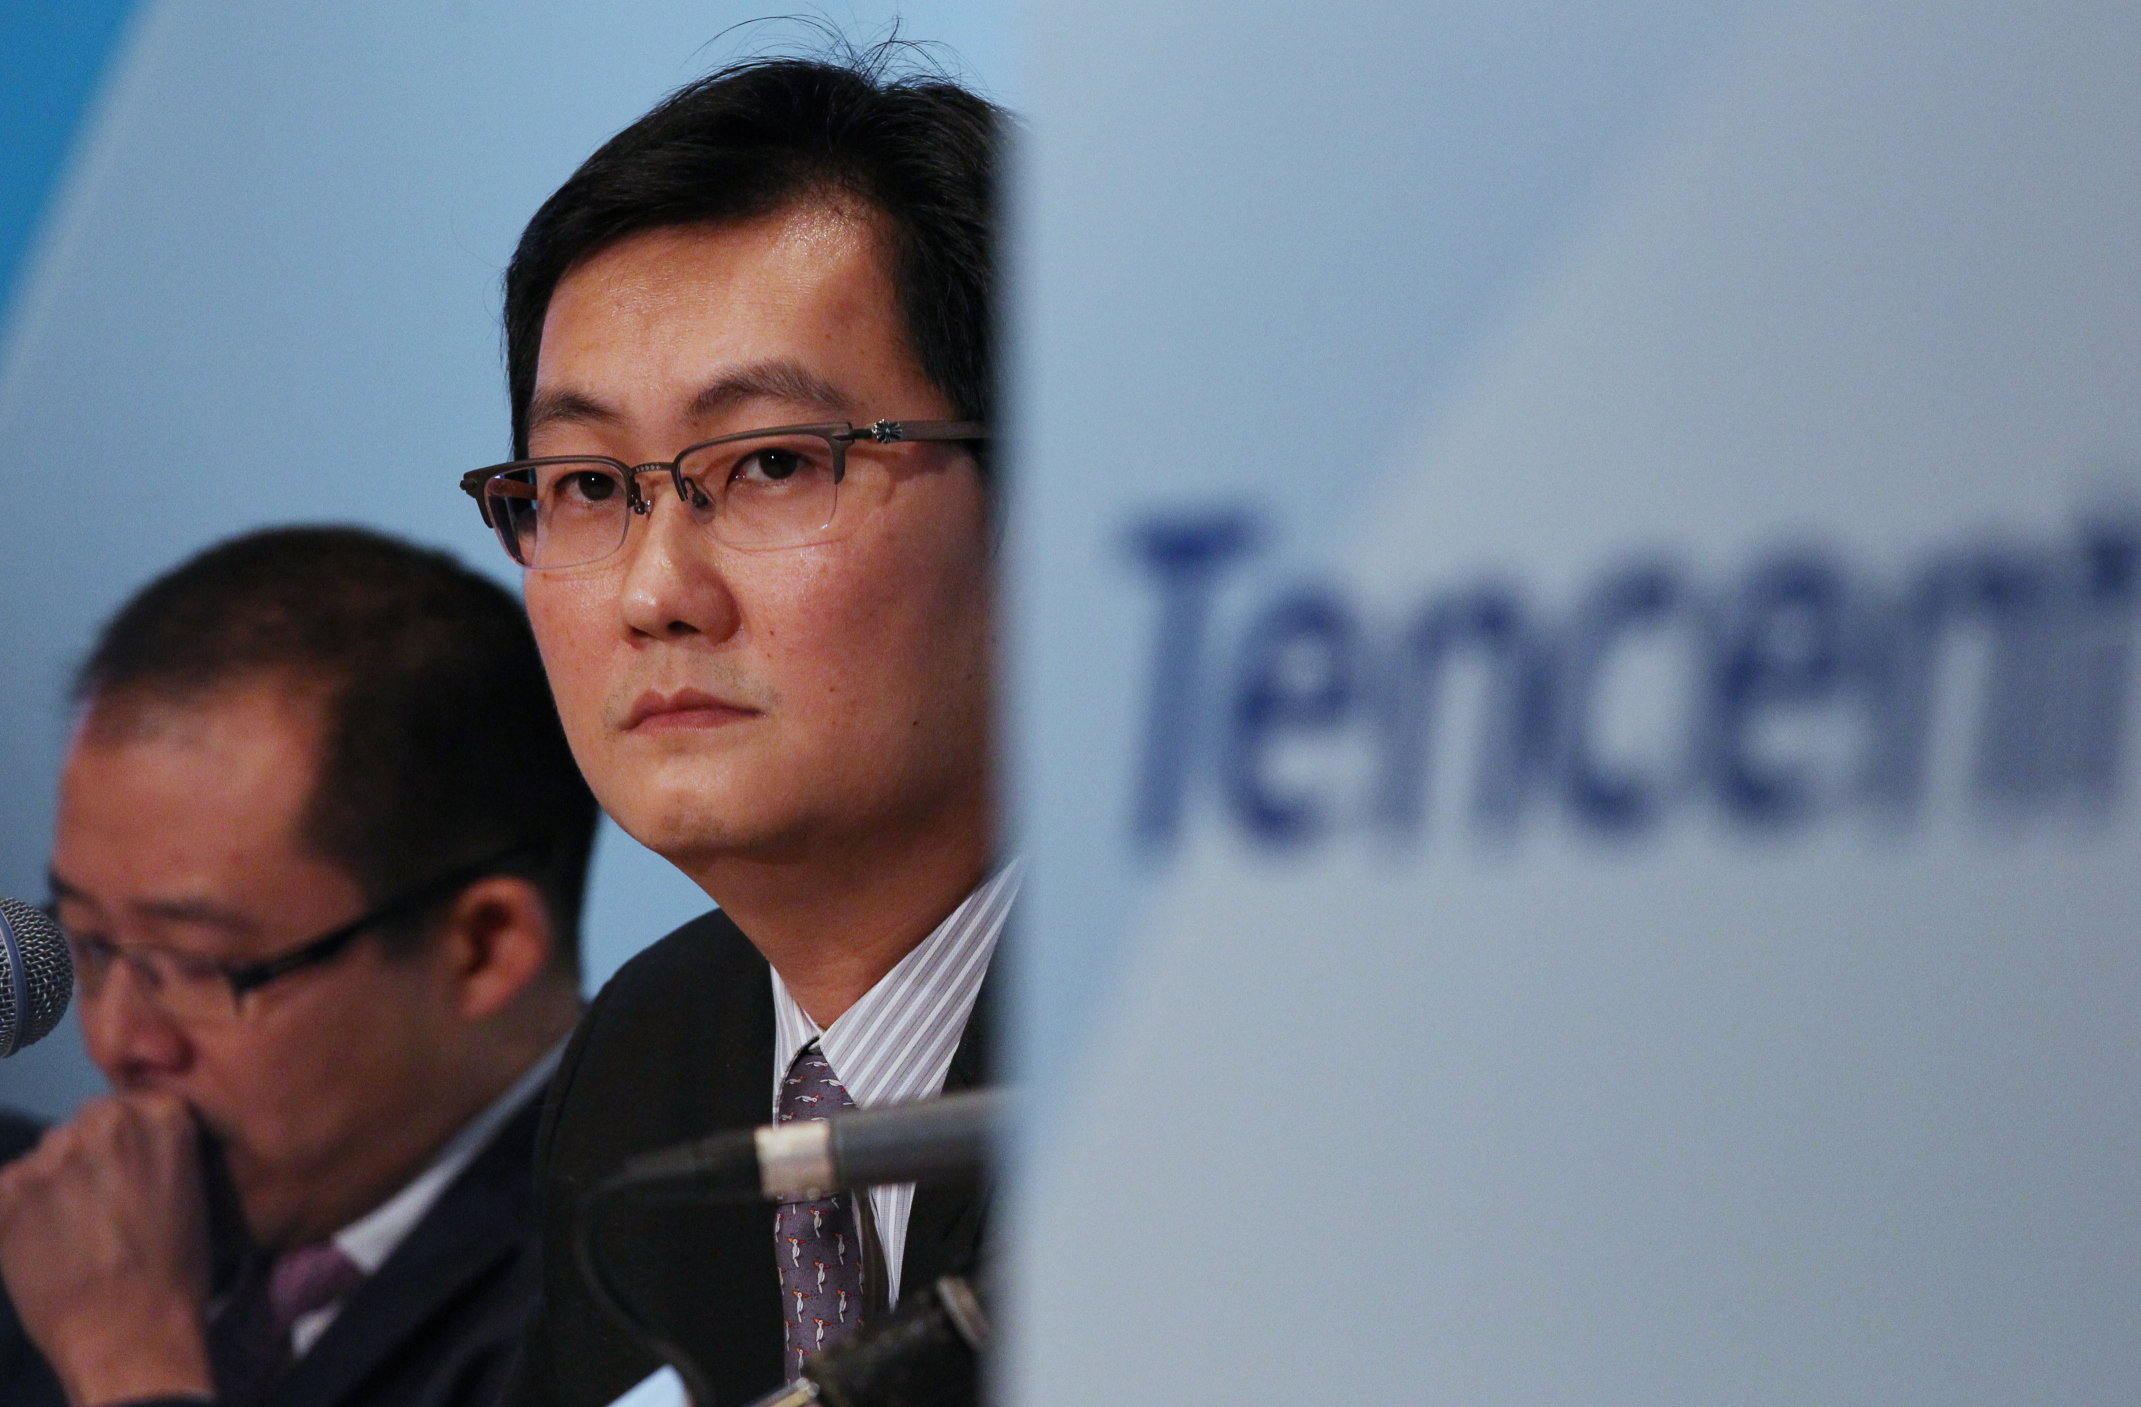 Martin Lau Chi-ping, President; and Pony Ma Huateng, Chairman and CEO, Tencent Holdings Limited, announce the company's 2013 fourth quarter and annual results. Photo: SCMP